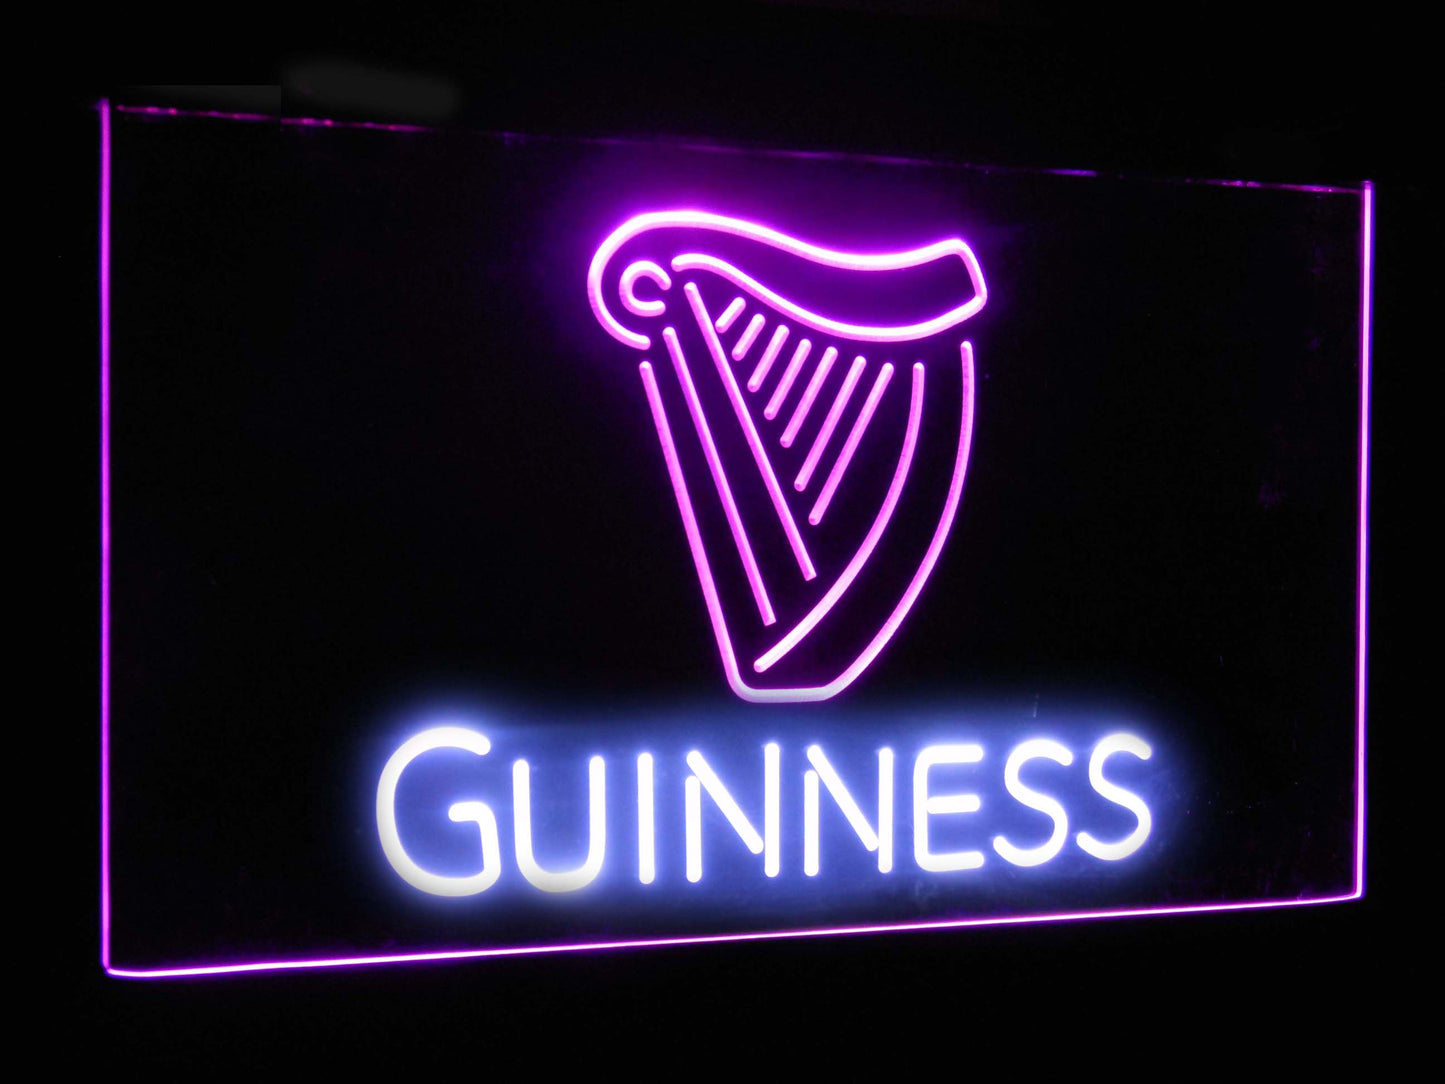 Guinness Ale  Bar Decoration Gift Dual Color Led Neon Light Signs st6-a2002 by Woody Signs Co. - Handmade Crafted Unique Wooden Creative